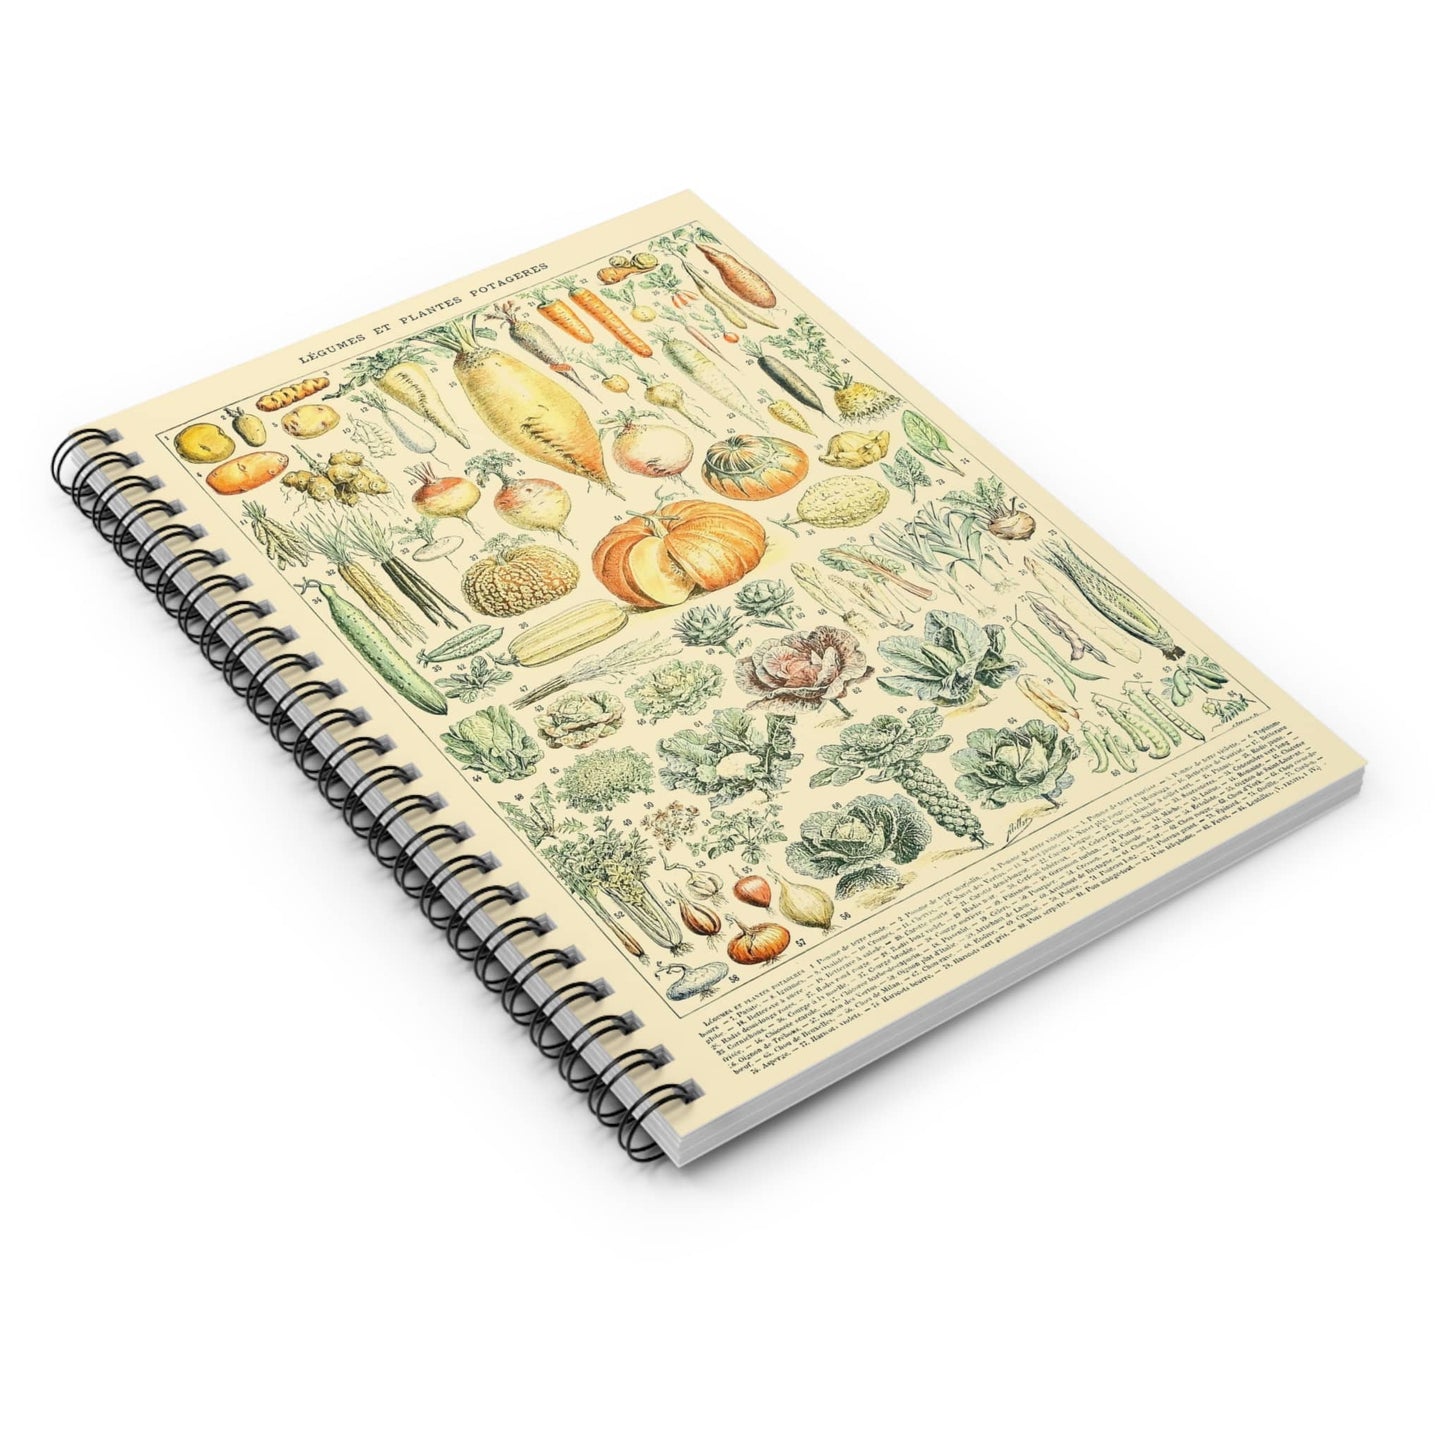 Vegetables Spiral Notebook Laying Flat on White Surface